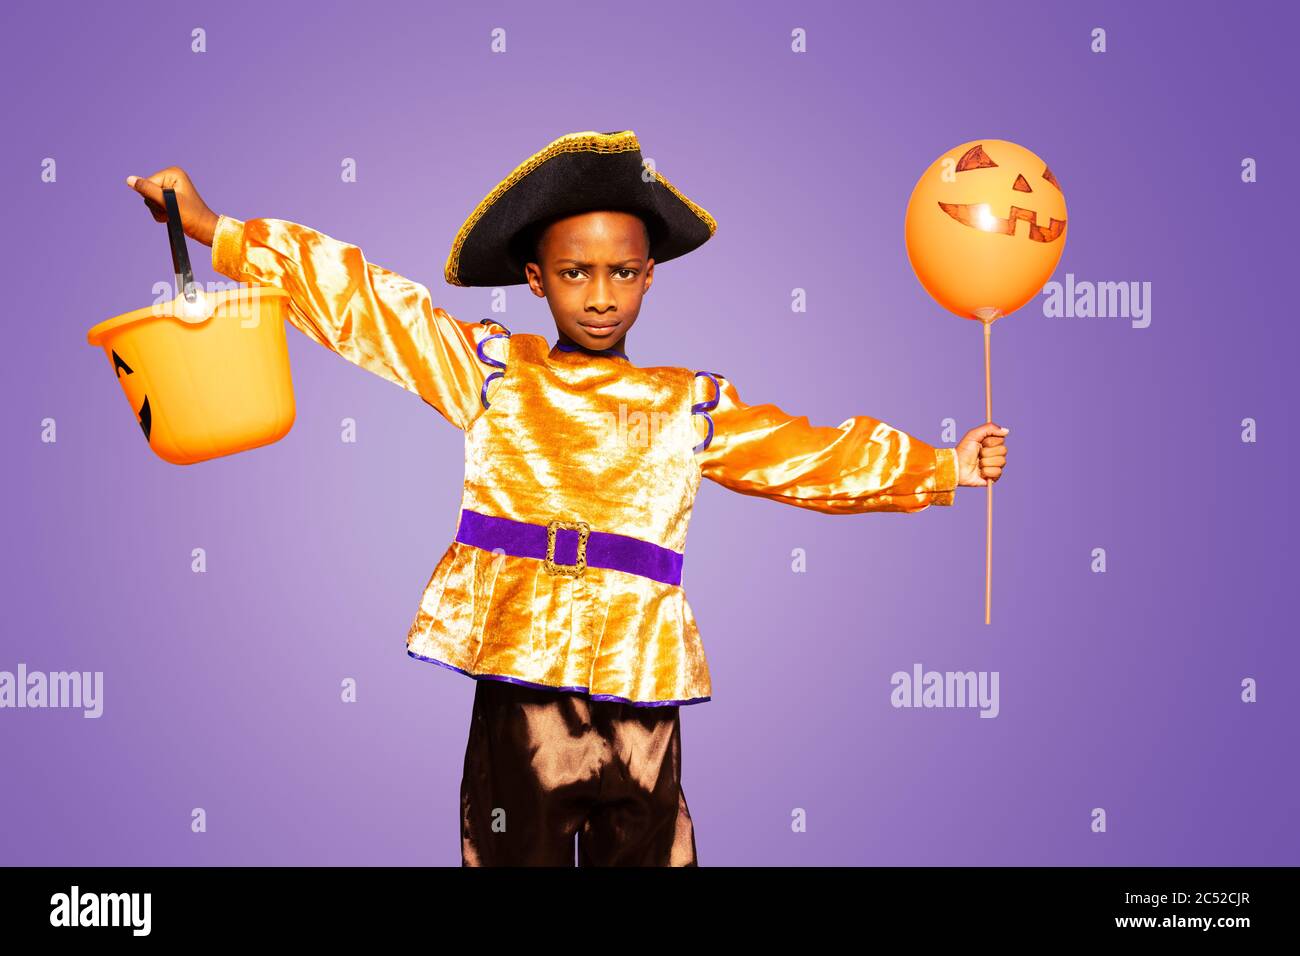 Little cute black boy in Halloween costume spread hands with serious face standing over purple background holding scary candy bucket Stock Photo